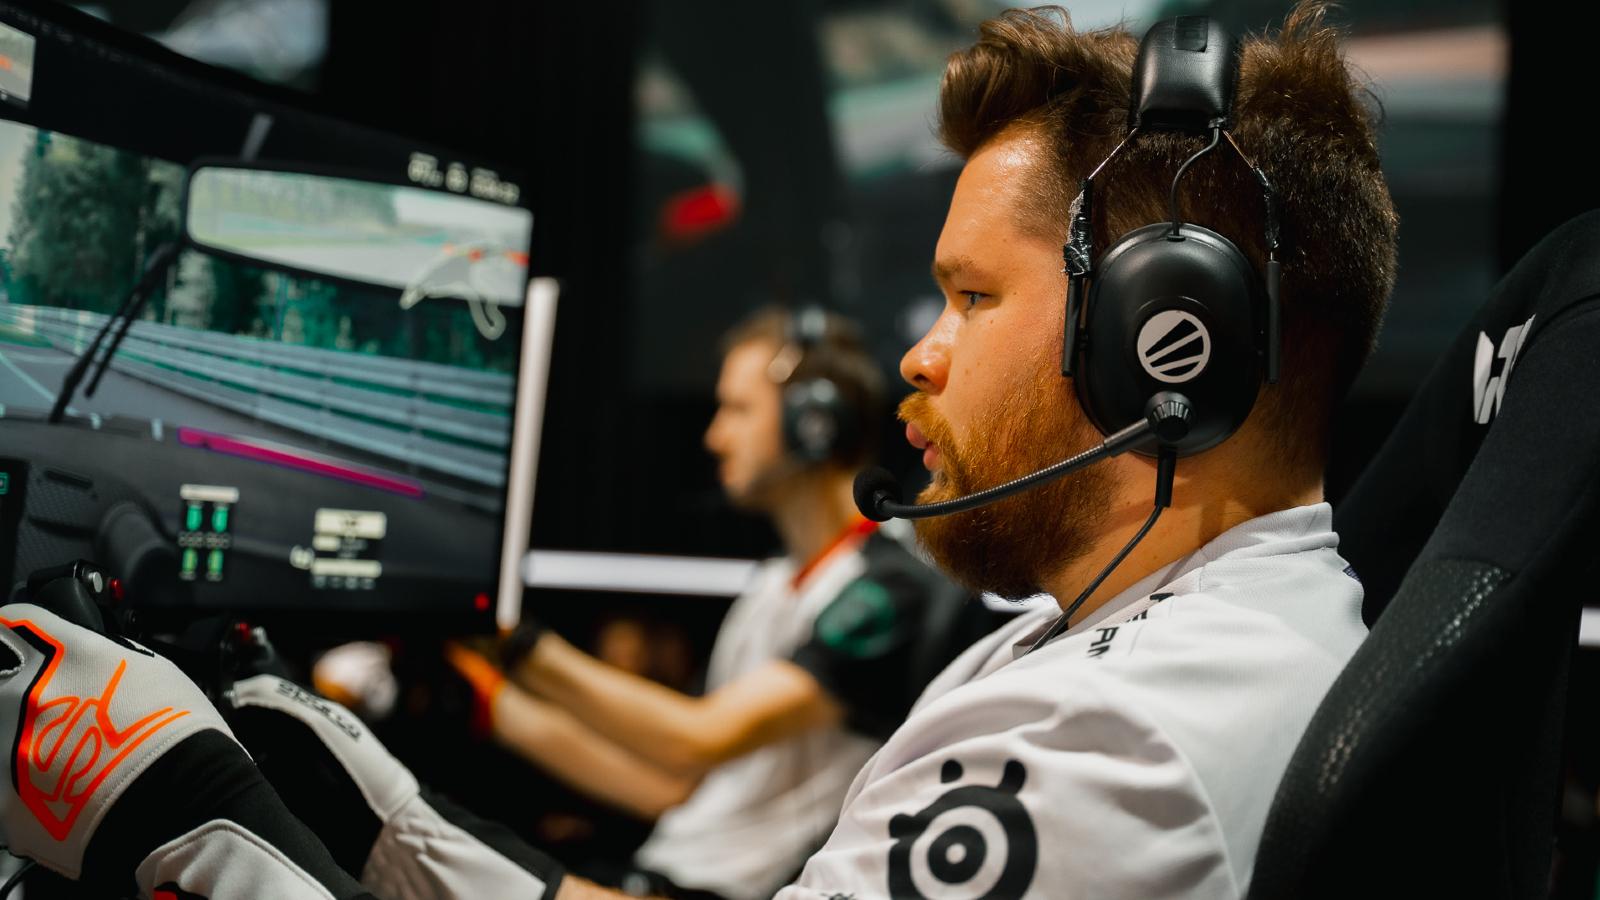 Crimsix shocked the world when he announced his signing with FaZe Clan to race at IEM Katowice.